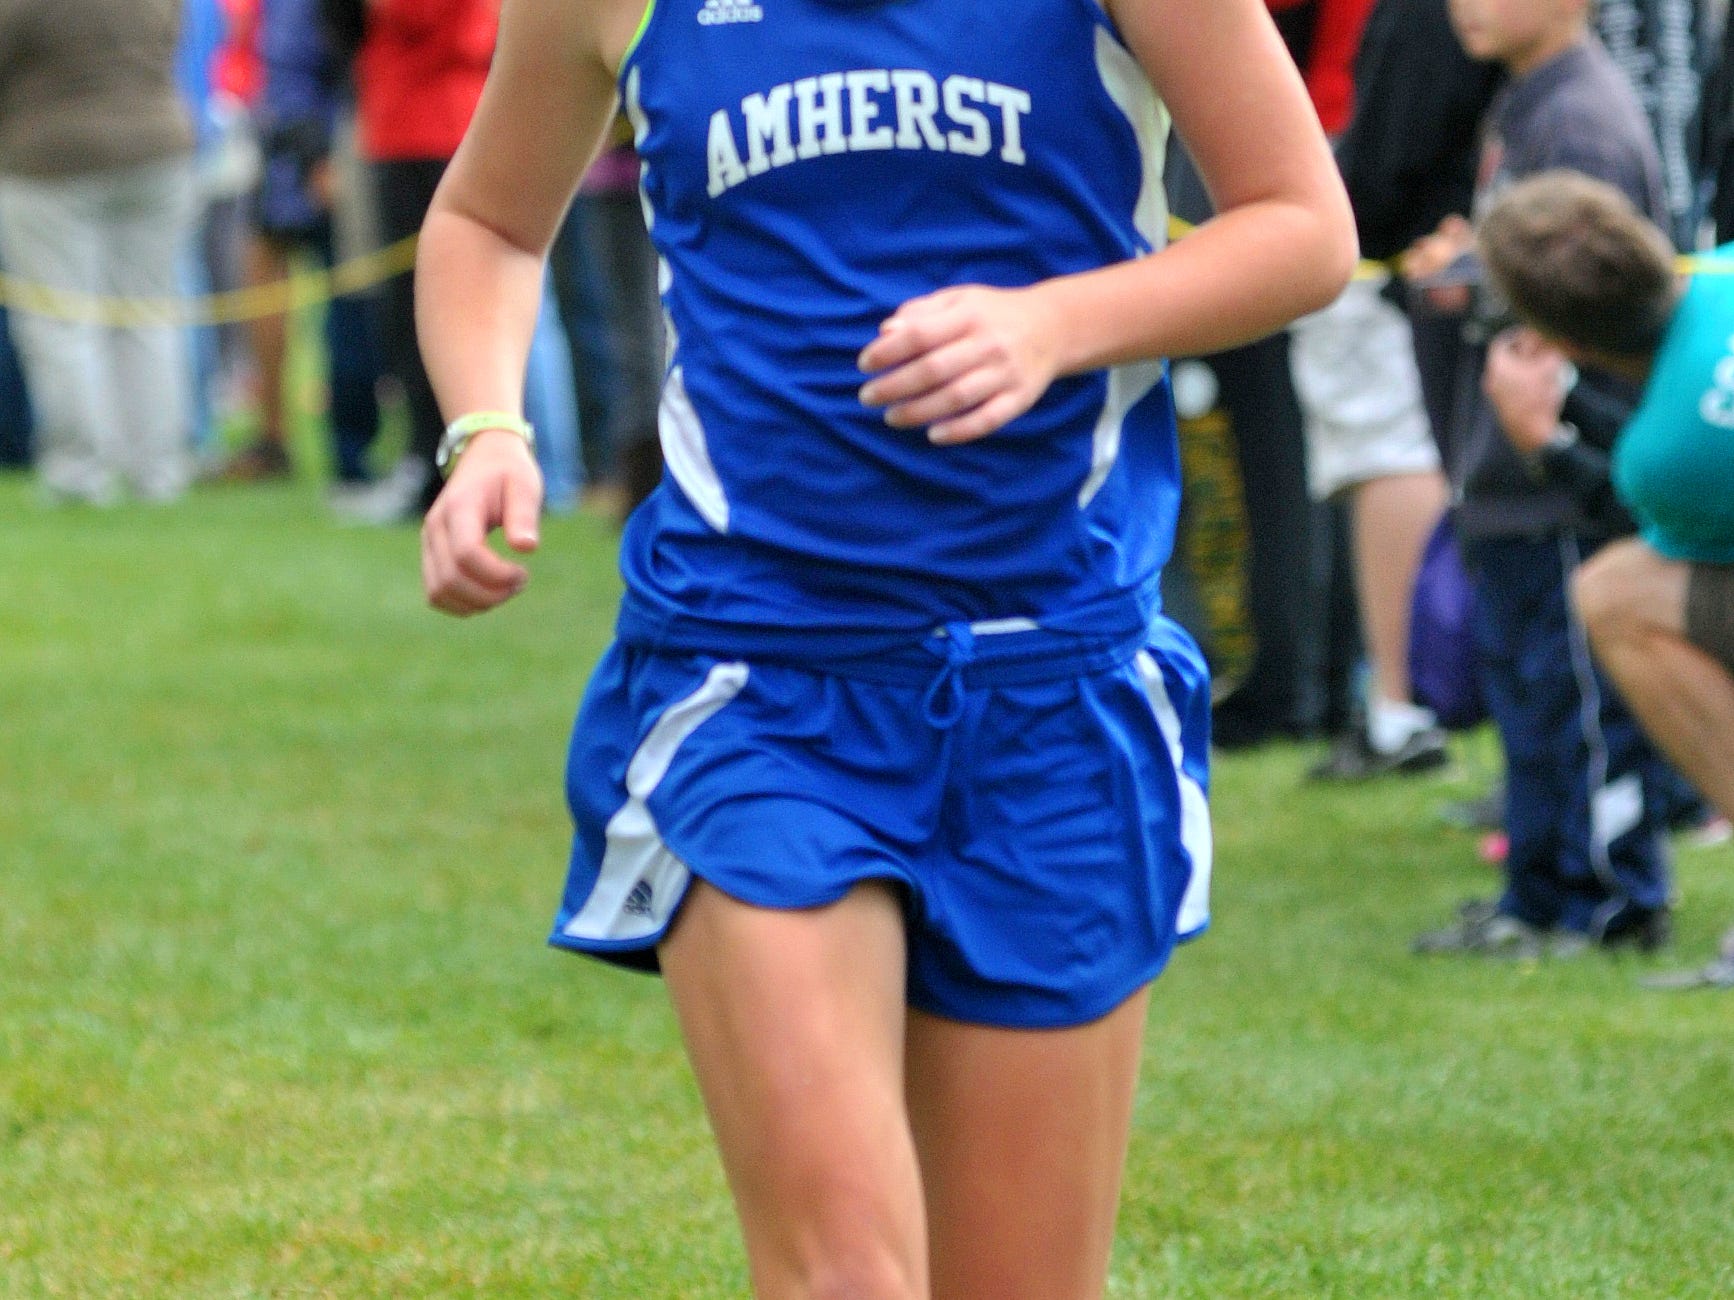 Amherst junior Alissa Niggemann placed eight in the WIAA Division 3 race at the state cross country meet. She is the Gannett Central Wisconsin Media girls runner of the year.